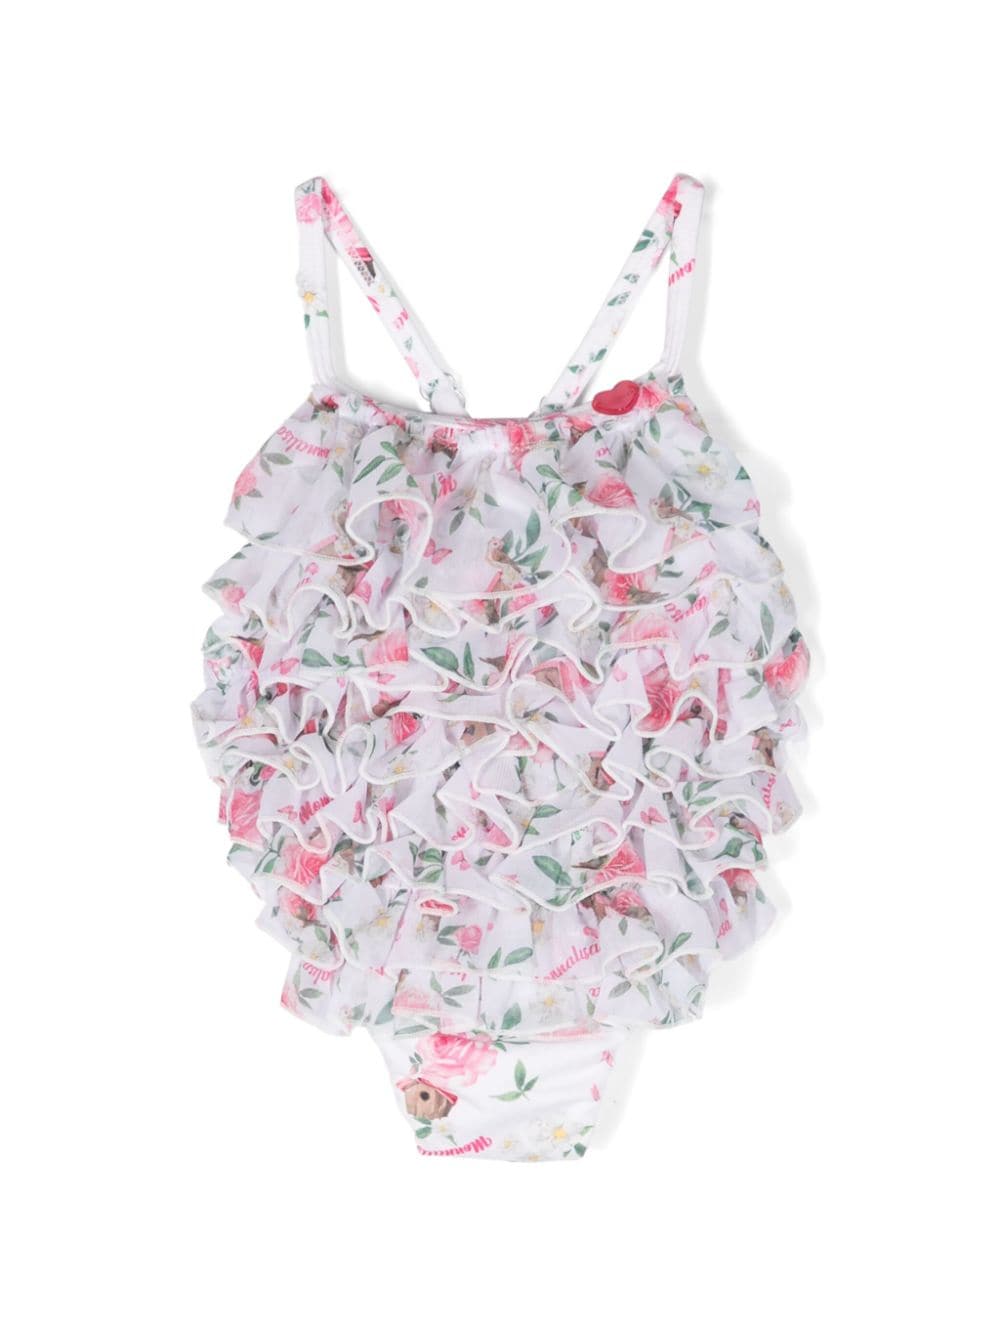 White floral print baby swimsuit